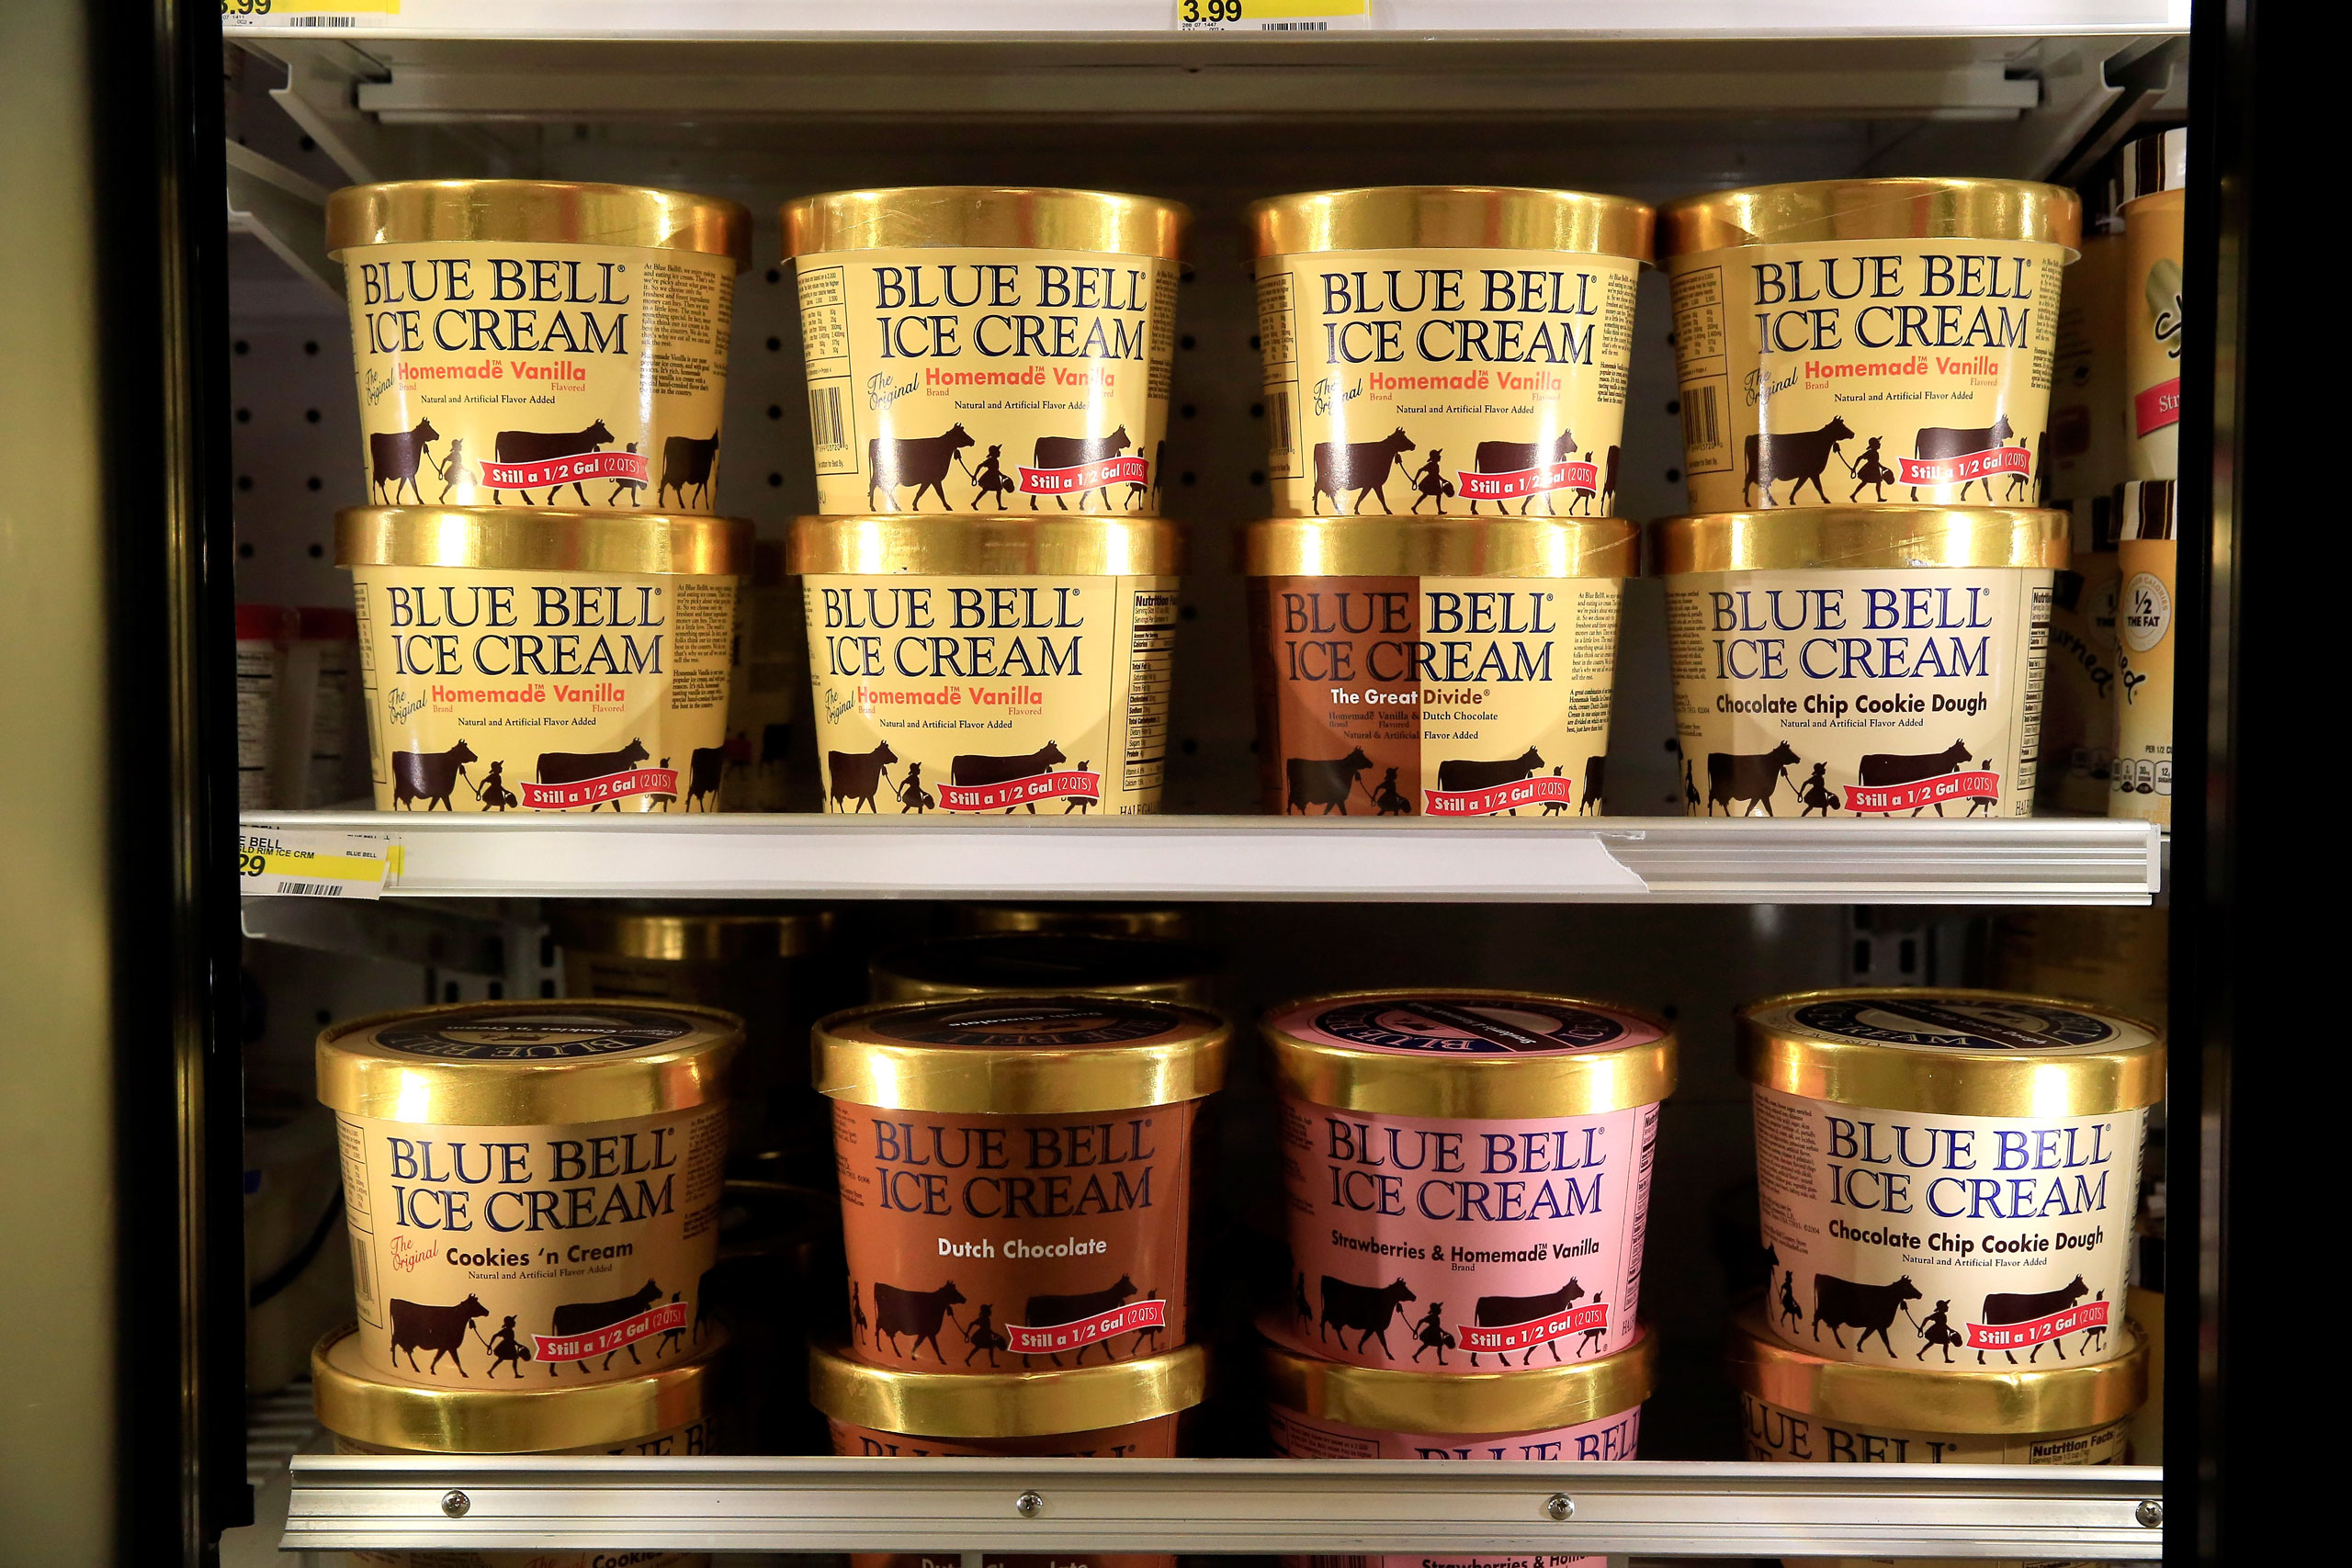 Blue Bell Ice Cream is seen on shelves of a grocery store prior to being removed on April 21, 2015 in Overland Park, Kansas. Blue Bell Creameries recalled all products following a Listeria contamination. (Photo by Jamie Squire/Getty Images)